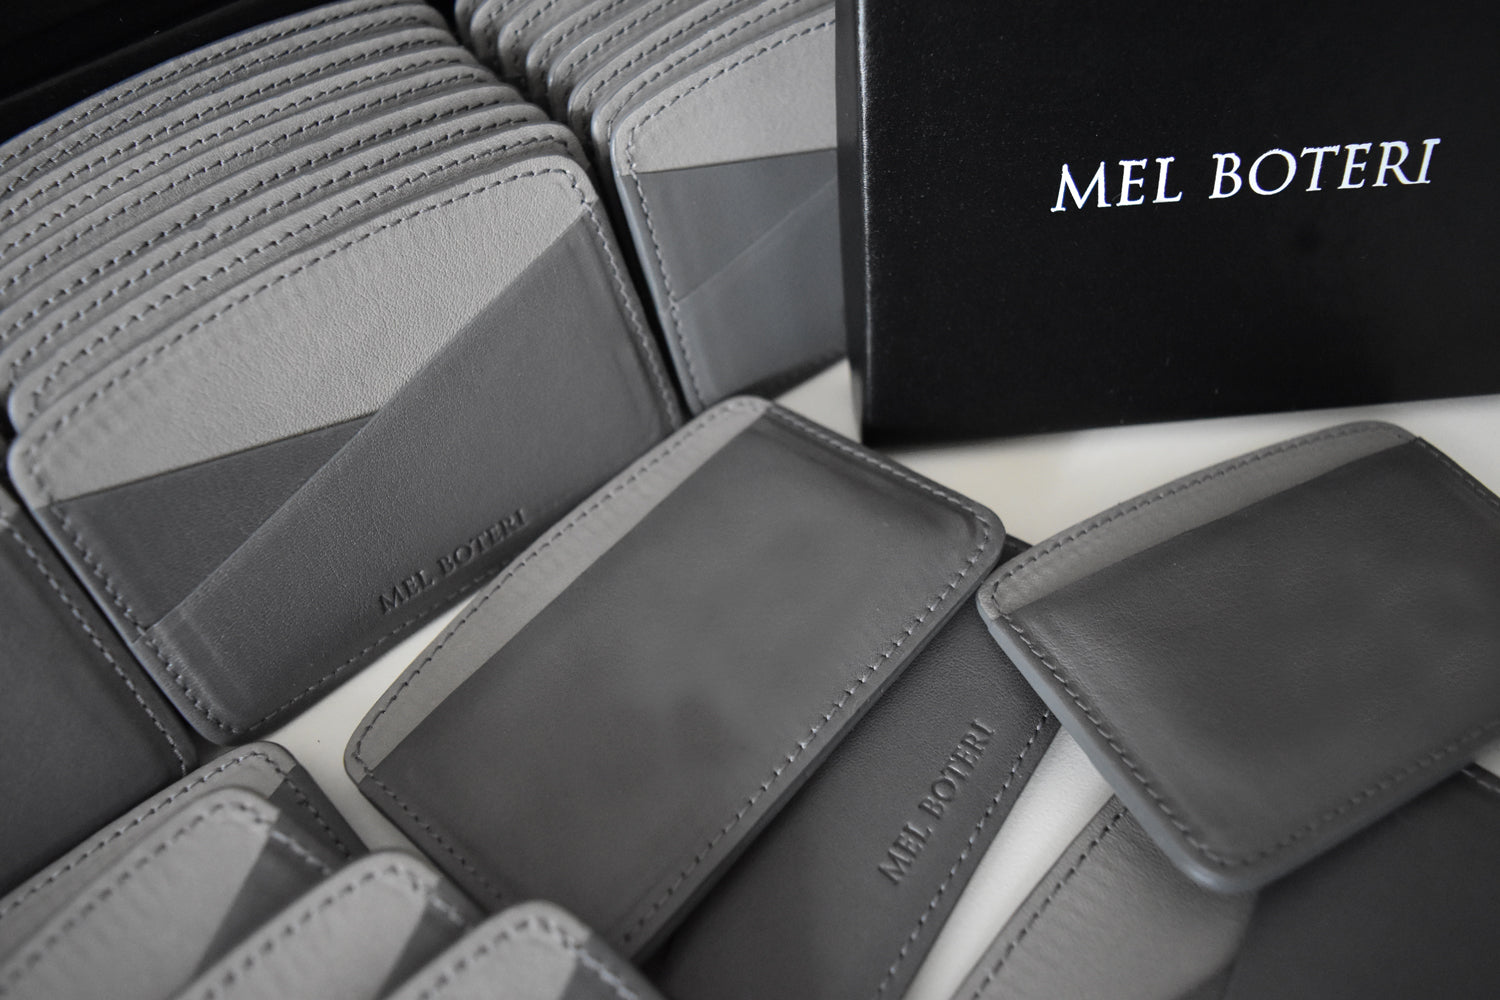 25 Professional Corporate Gift Ideas Under $100 | Mel Boteri Fashion Partners | Slim Fit Card Holder